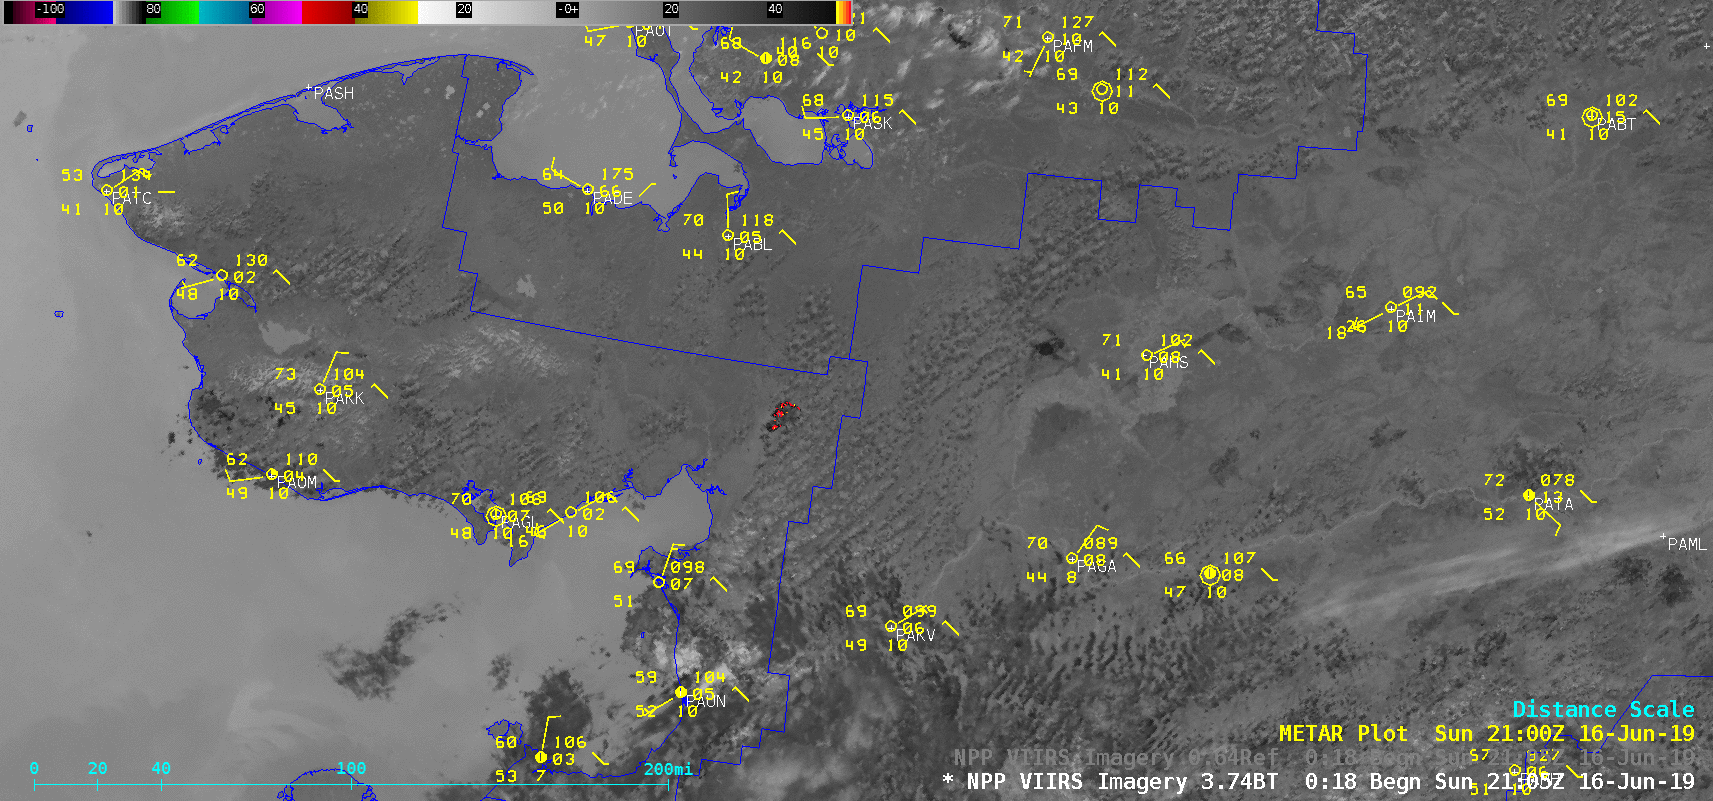 Suomi NPP VIIRS Shortwave Infrared (3.74 µm) and Visible (0.64 µm) images, with surface observations plotted in yellow [click to enlarge]